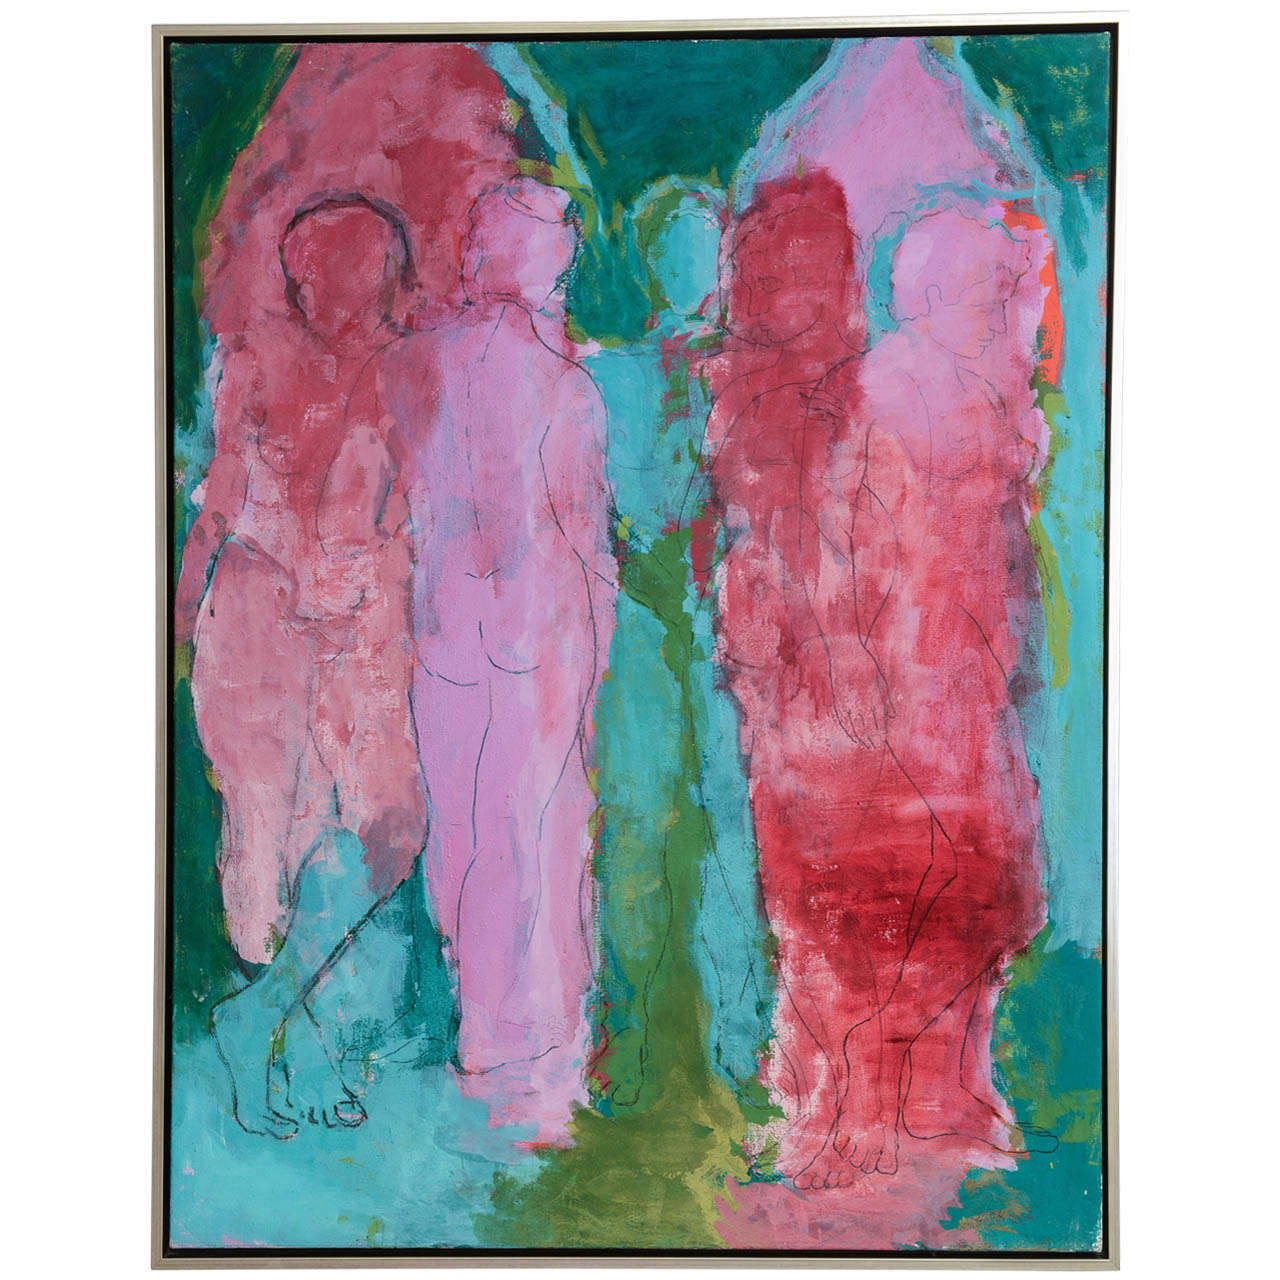 20th Century Abstract by Jan Sivertsen, "Figure ... Red/Greed" For Sale